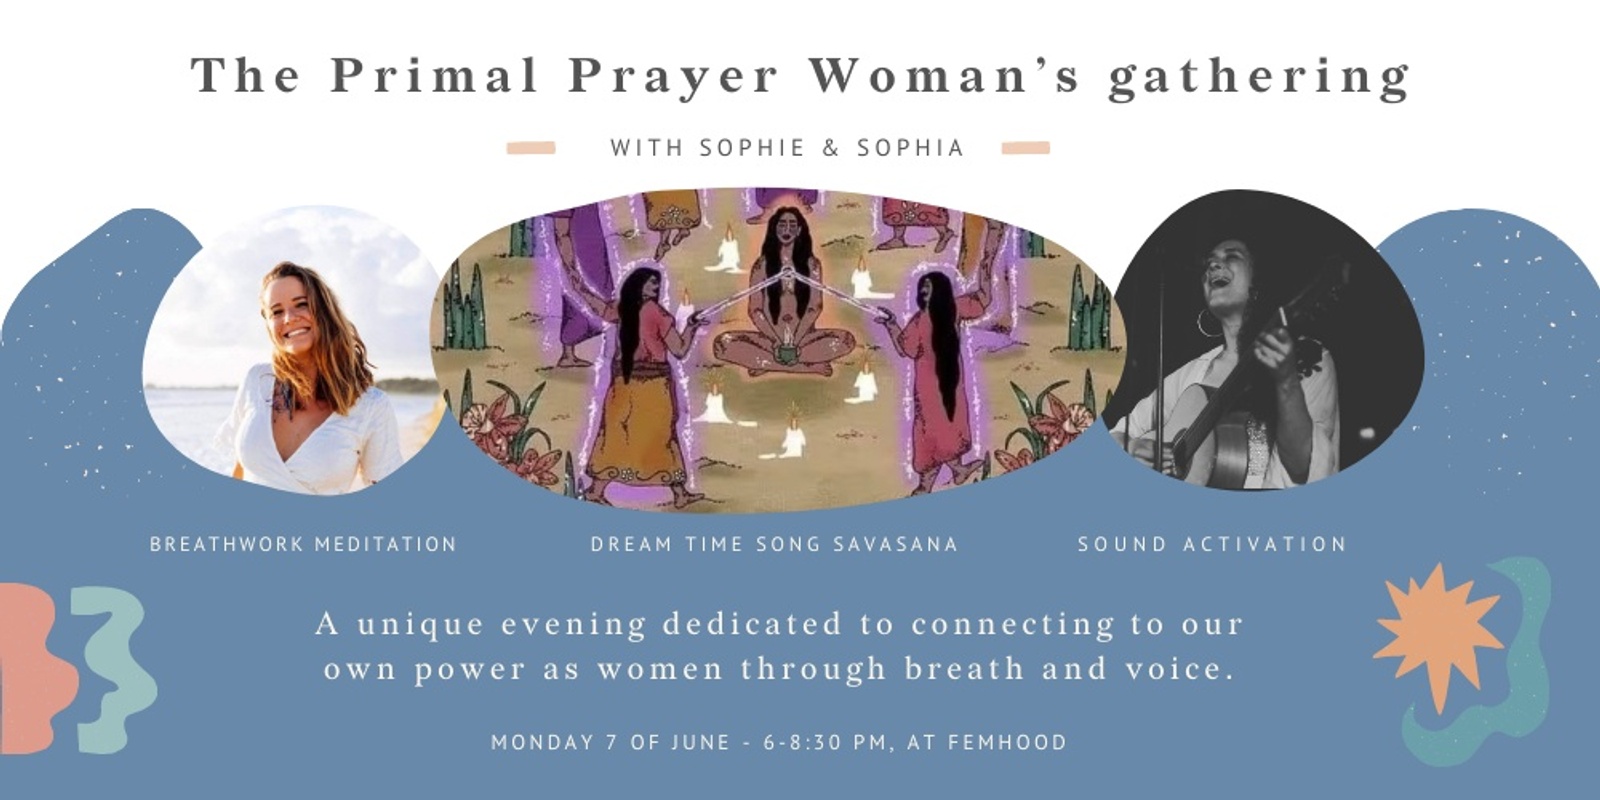 Banner image for The Primal Prayer   Woman’s Gathering  ﻿with Sophie & Sophia -Breathwork meditation   - Sound activation   - Dream time song shavasana 